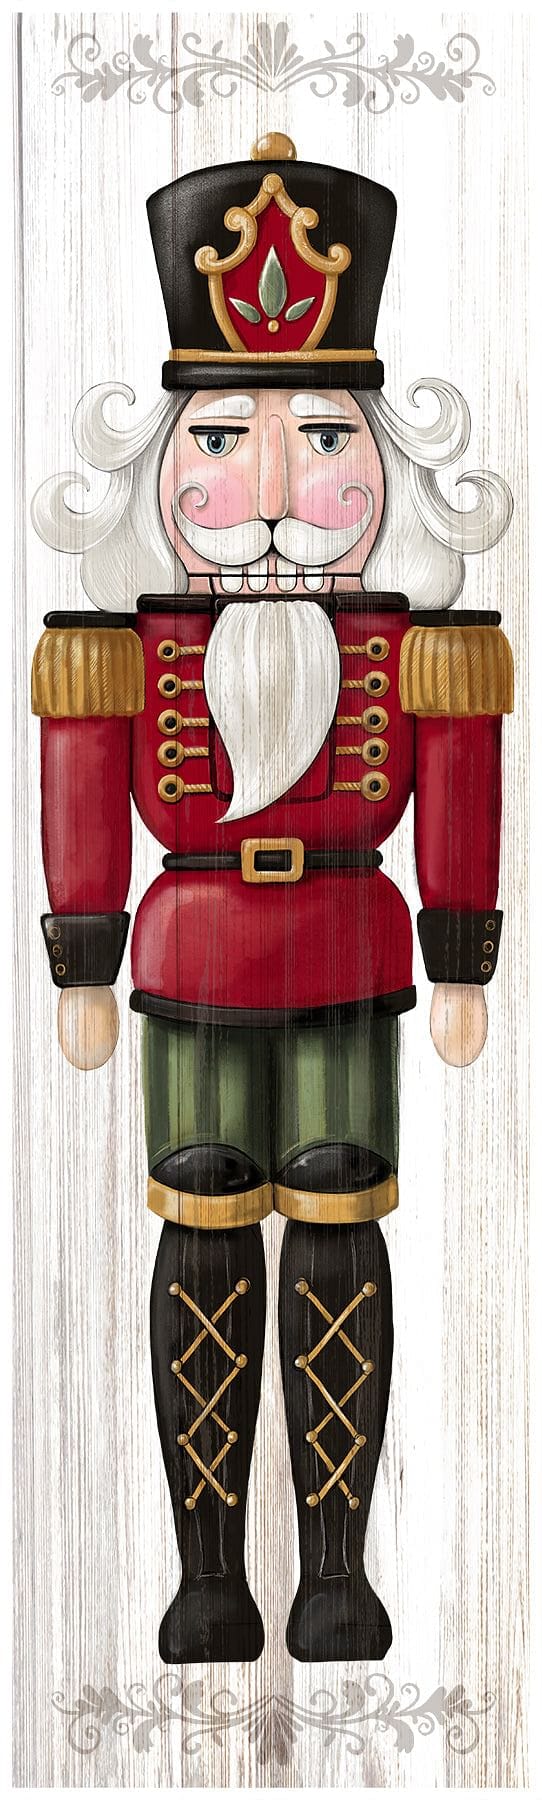 Wooden Nutcracker Wall Plaque - Shelburne Country Store